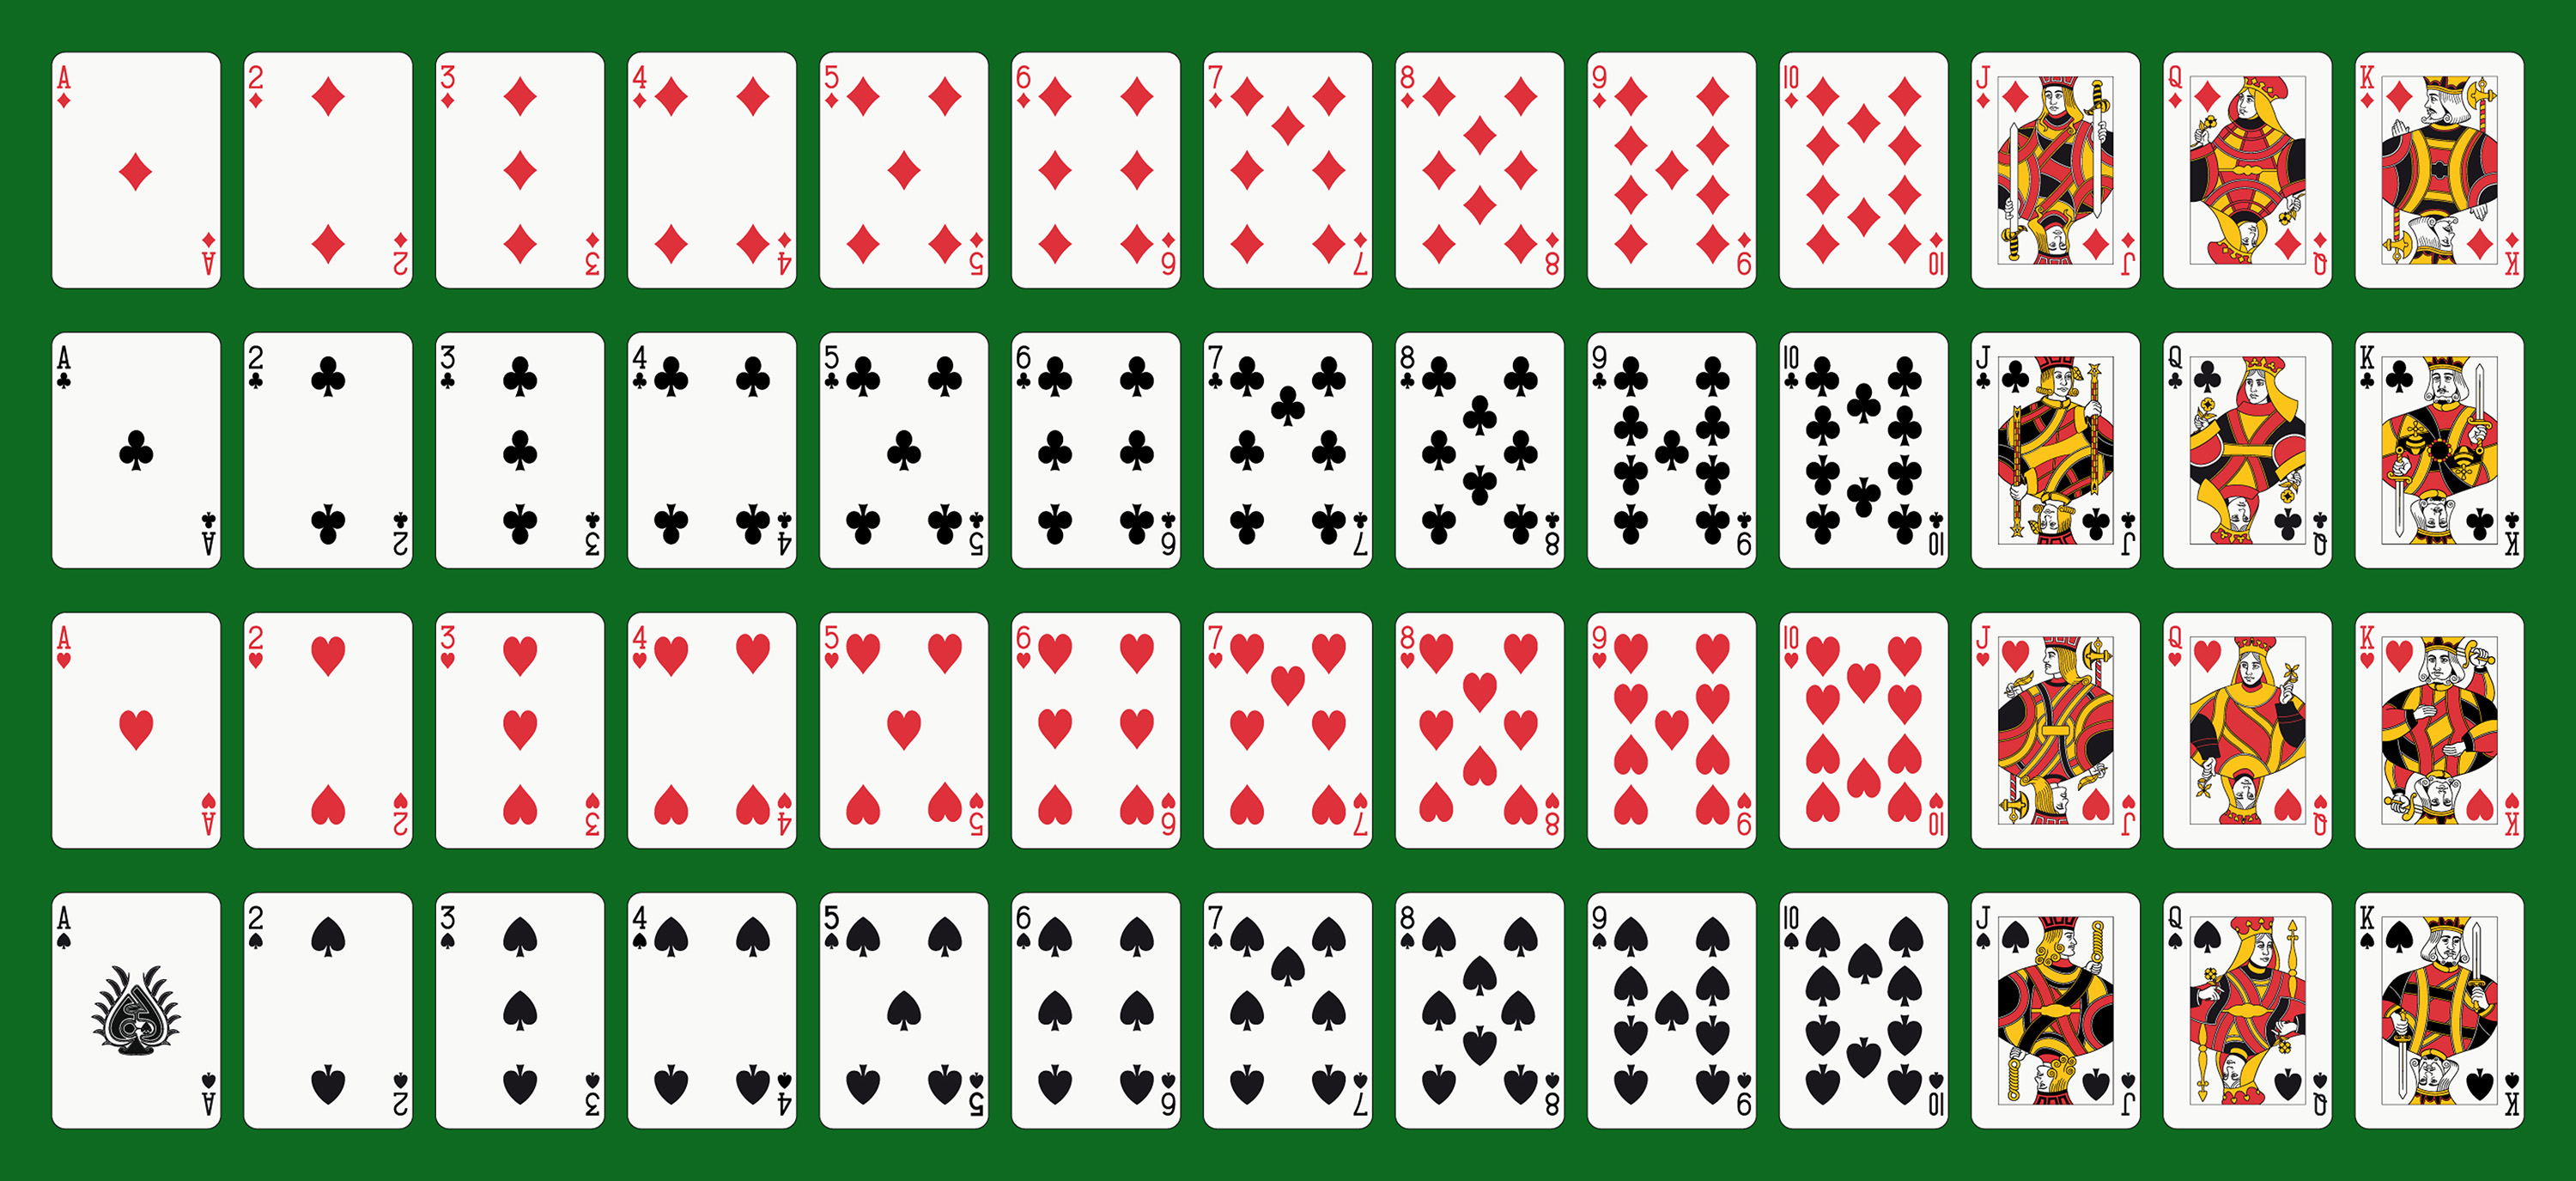 Standard deck of 52 playing cards.